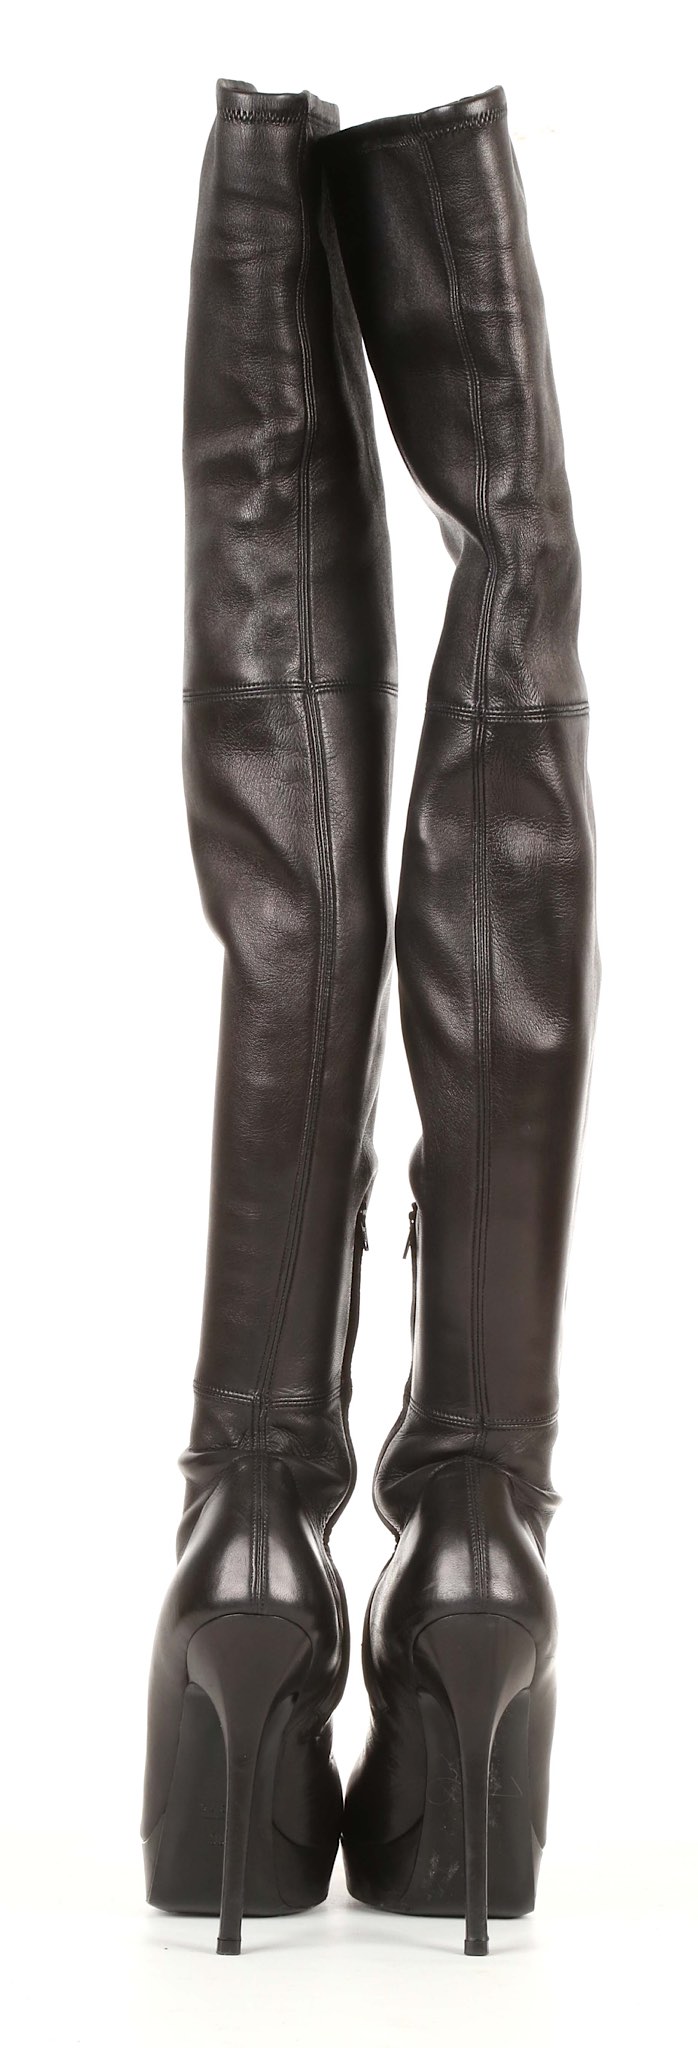 GUCCI THIGH HIGH BLACK LEATHER BOOTS, stiletto heel, size 38, and a pair of brown Casadei boots - Image 6 of 8